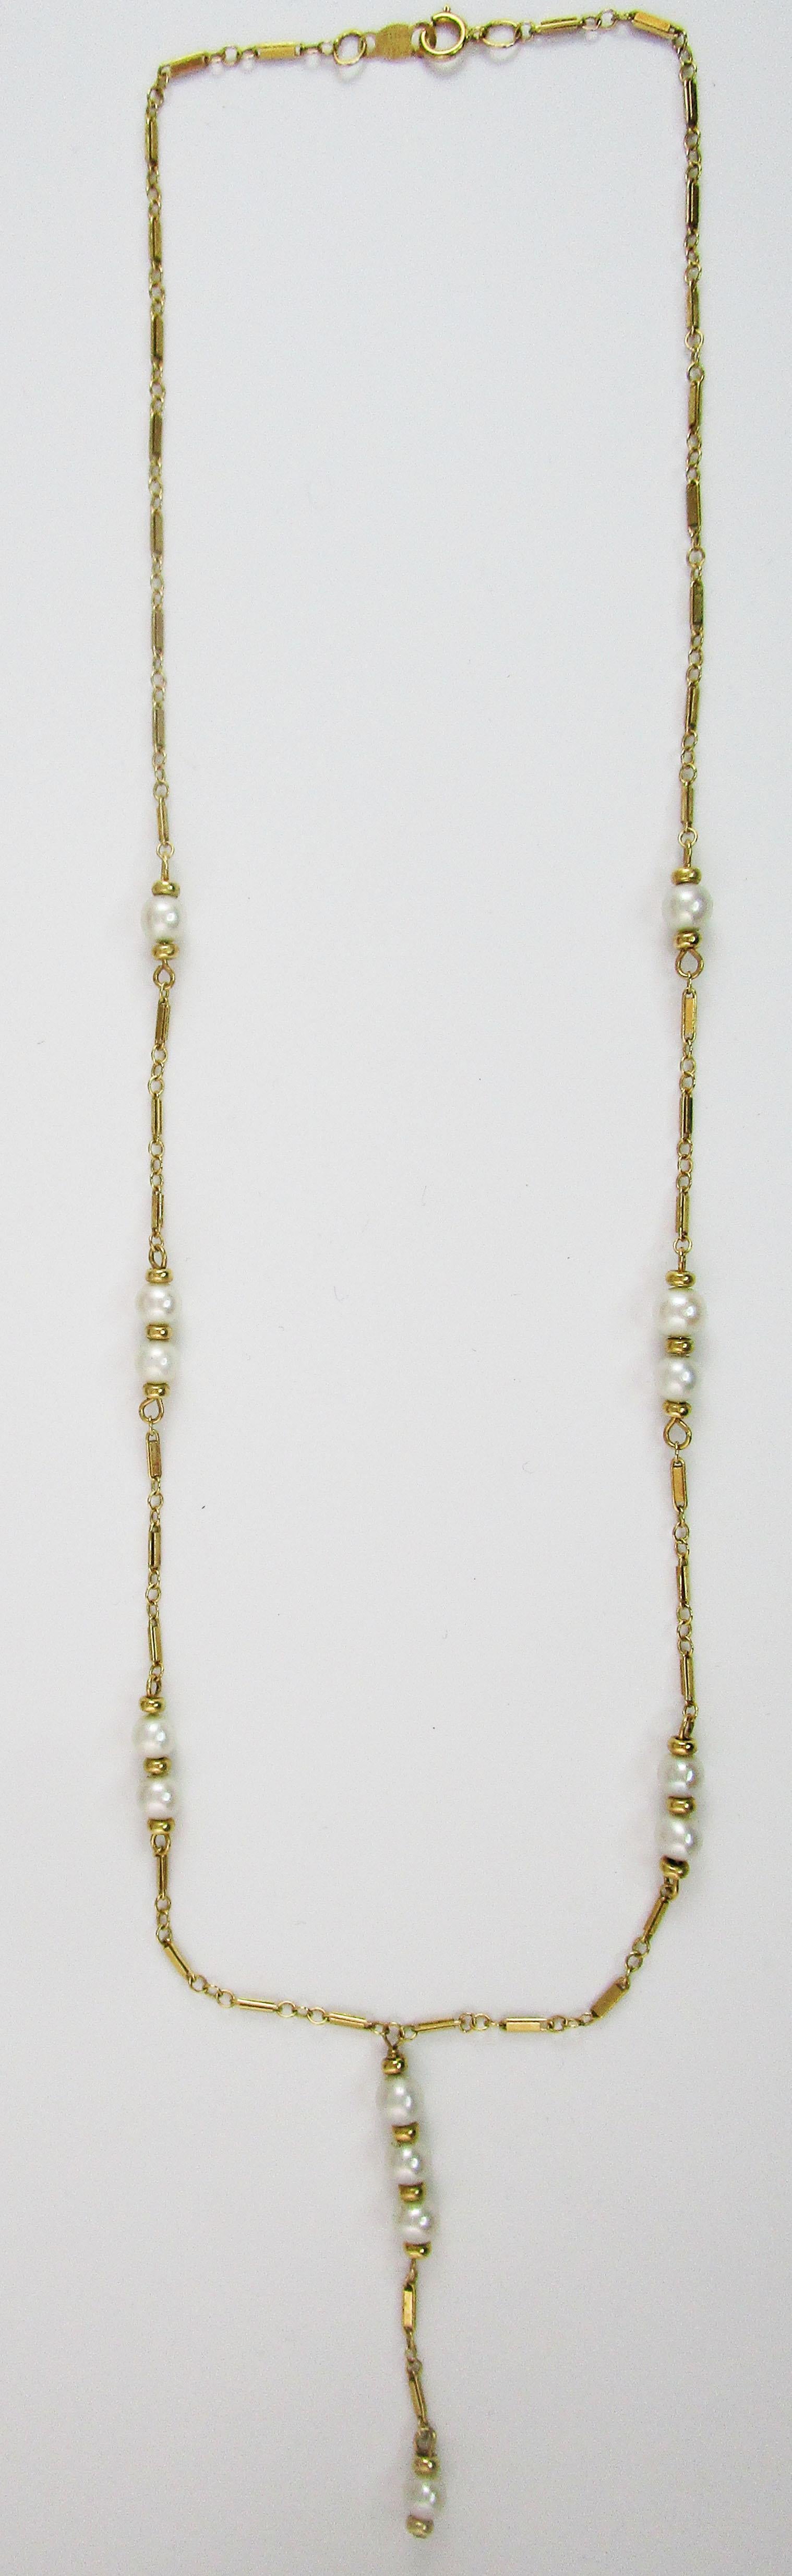 14 Karat Yellow Gold and Pearl Lariat Y Chain Necklace 1